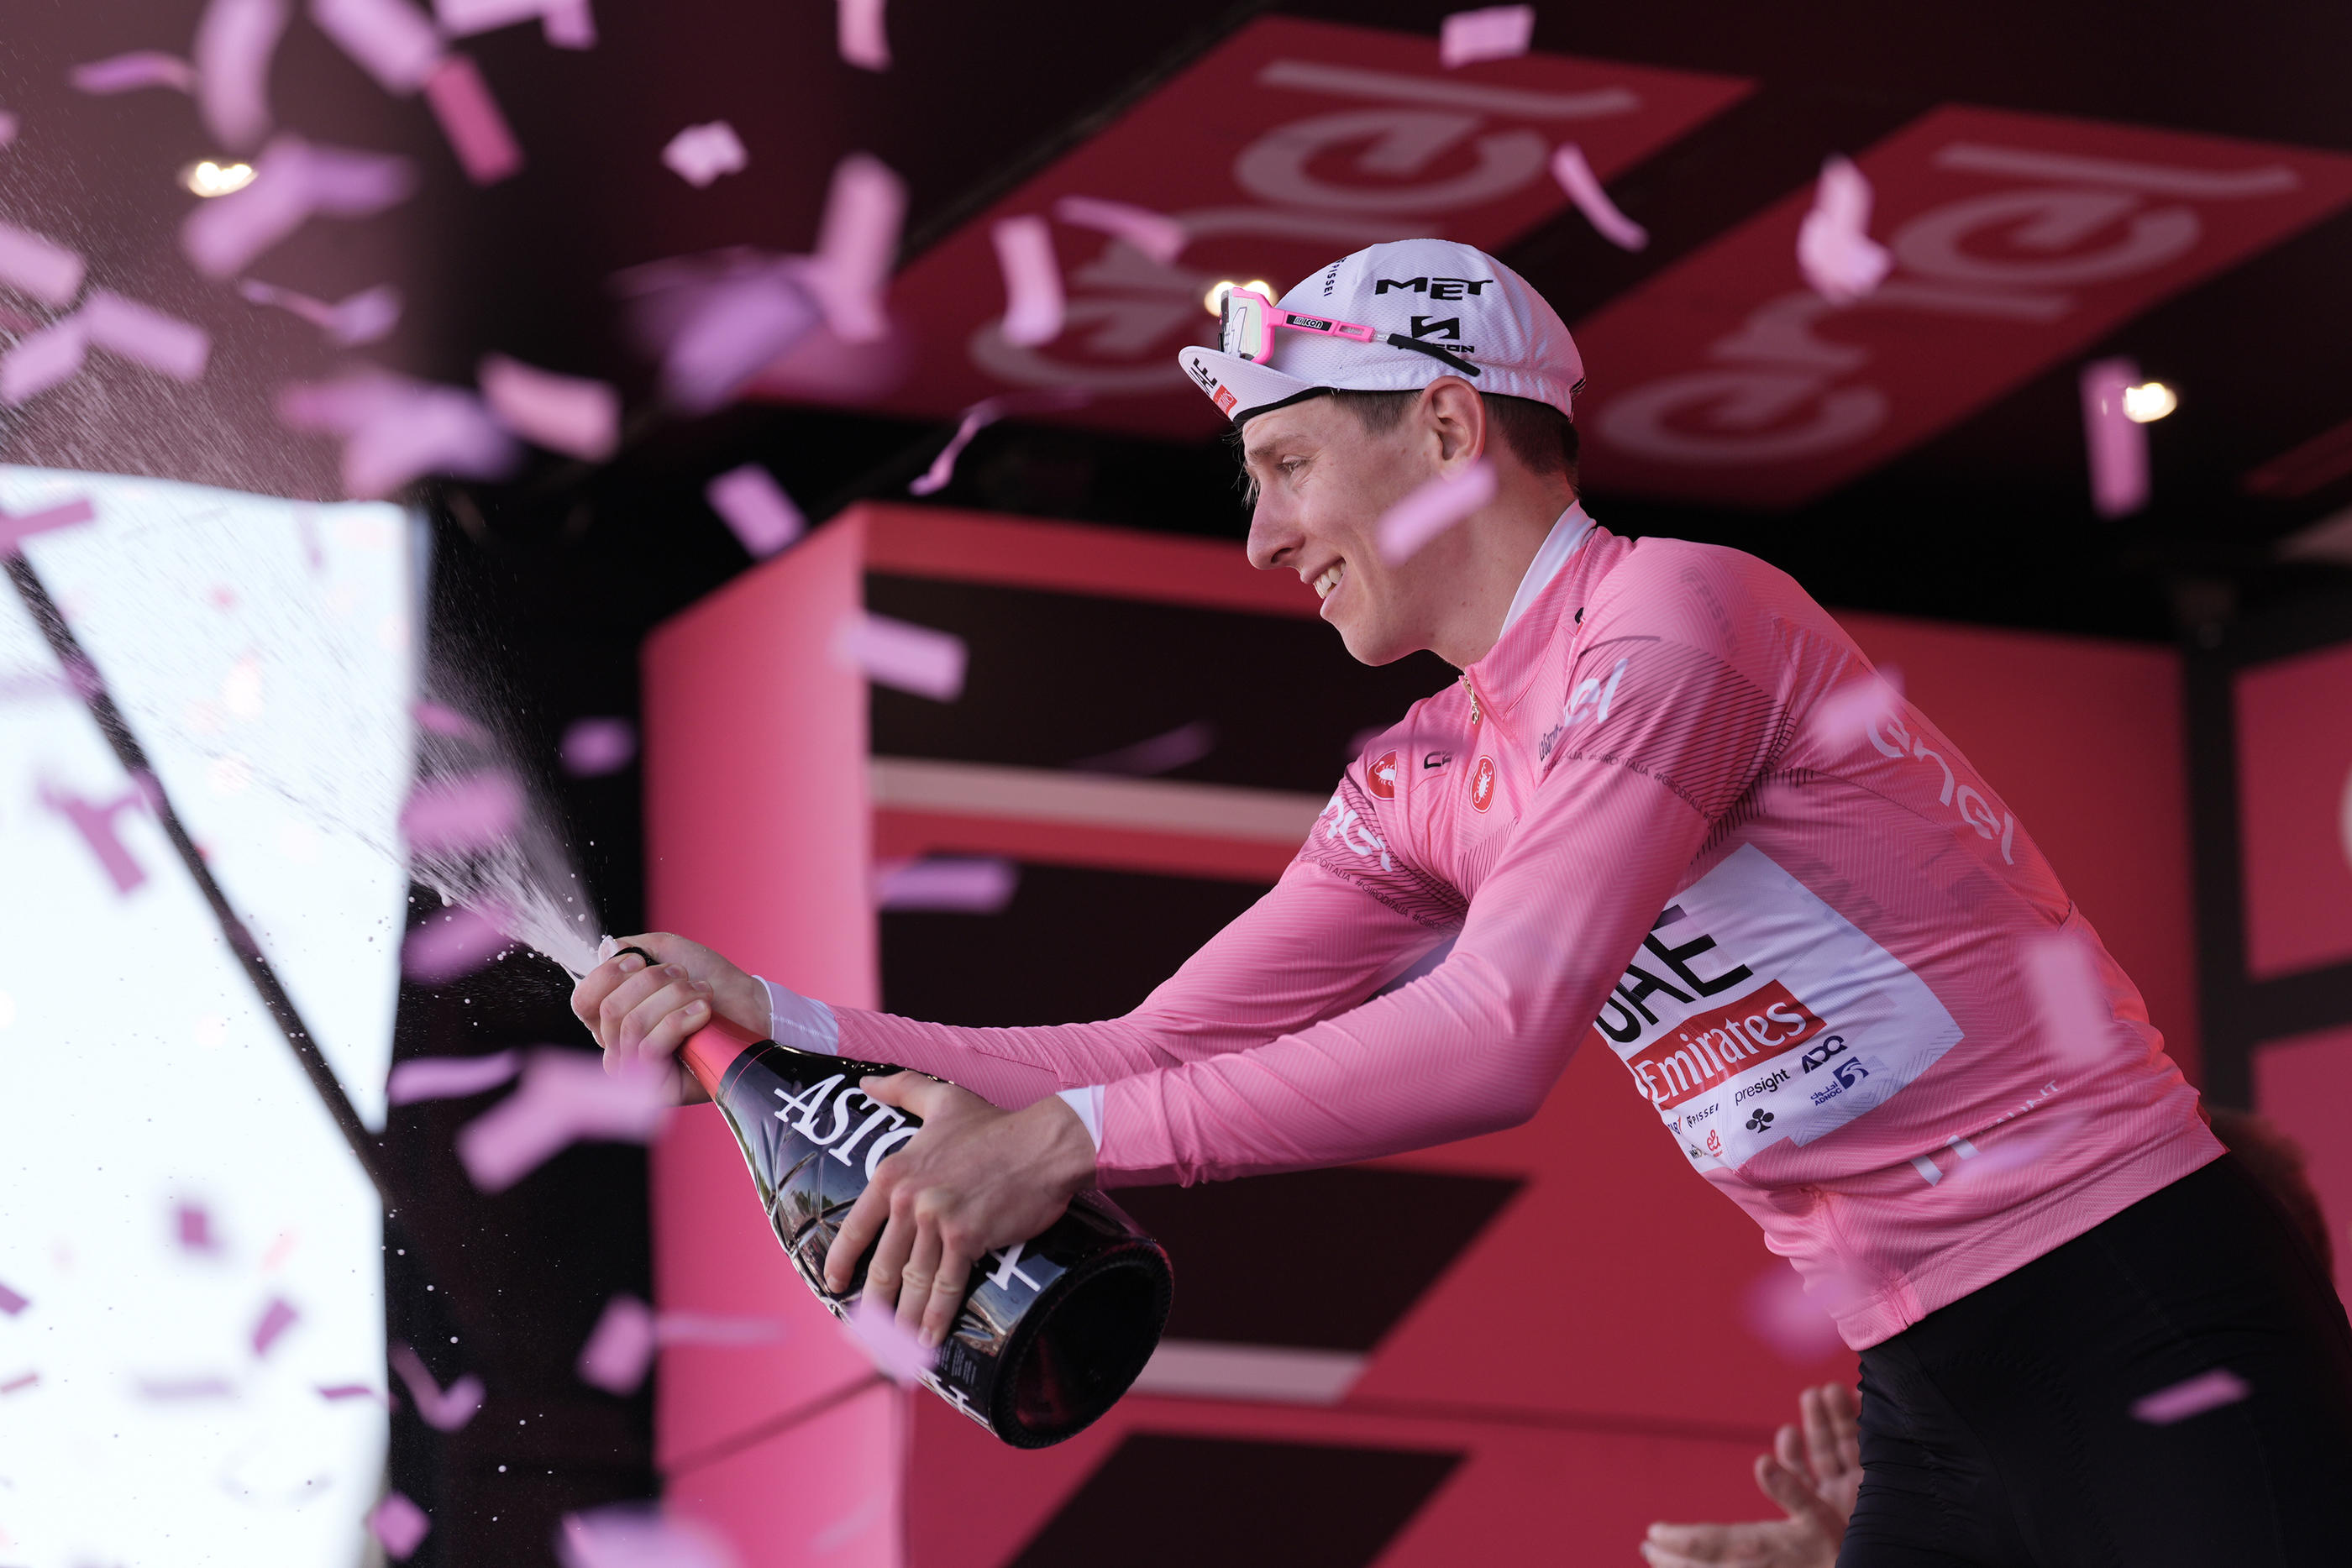 Tadej Pogacar (UAE Team Emirates) Pink Jersey on the podium the stage 14 of the Giro d'Italia 2024 ITT from Castiglione delle Stiviere to Desenzano del Garda, Italy - Saturday, May 18, 2024 - Sport, Cycling (Photo by Massimo Paolone / LaPresse)